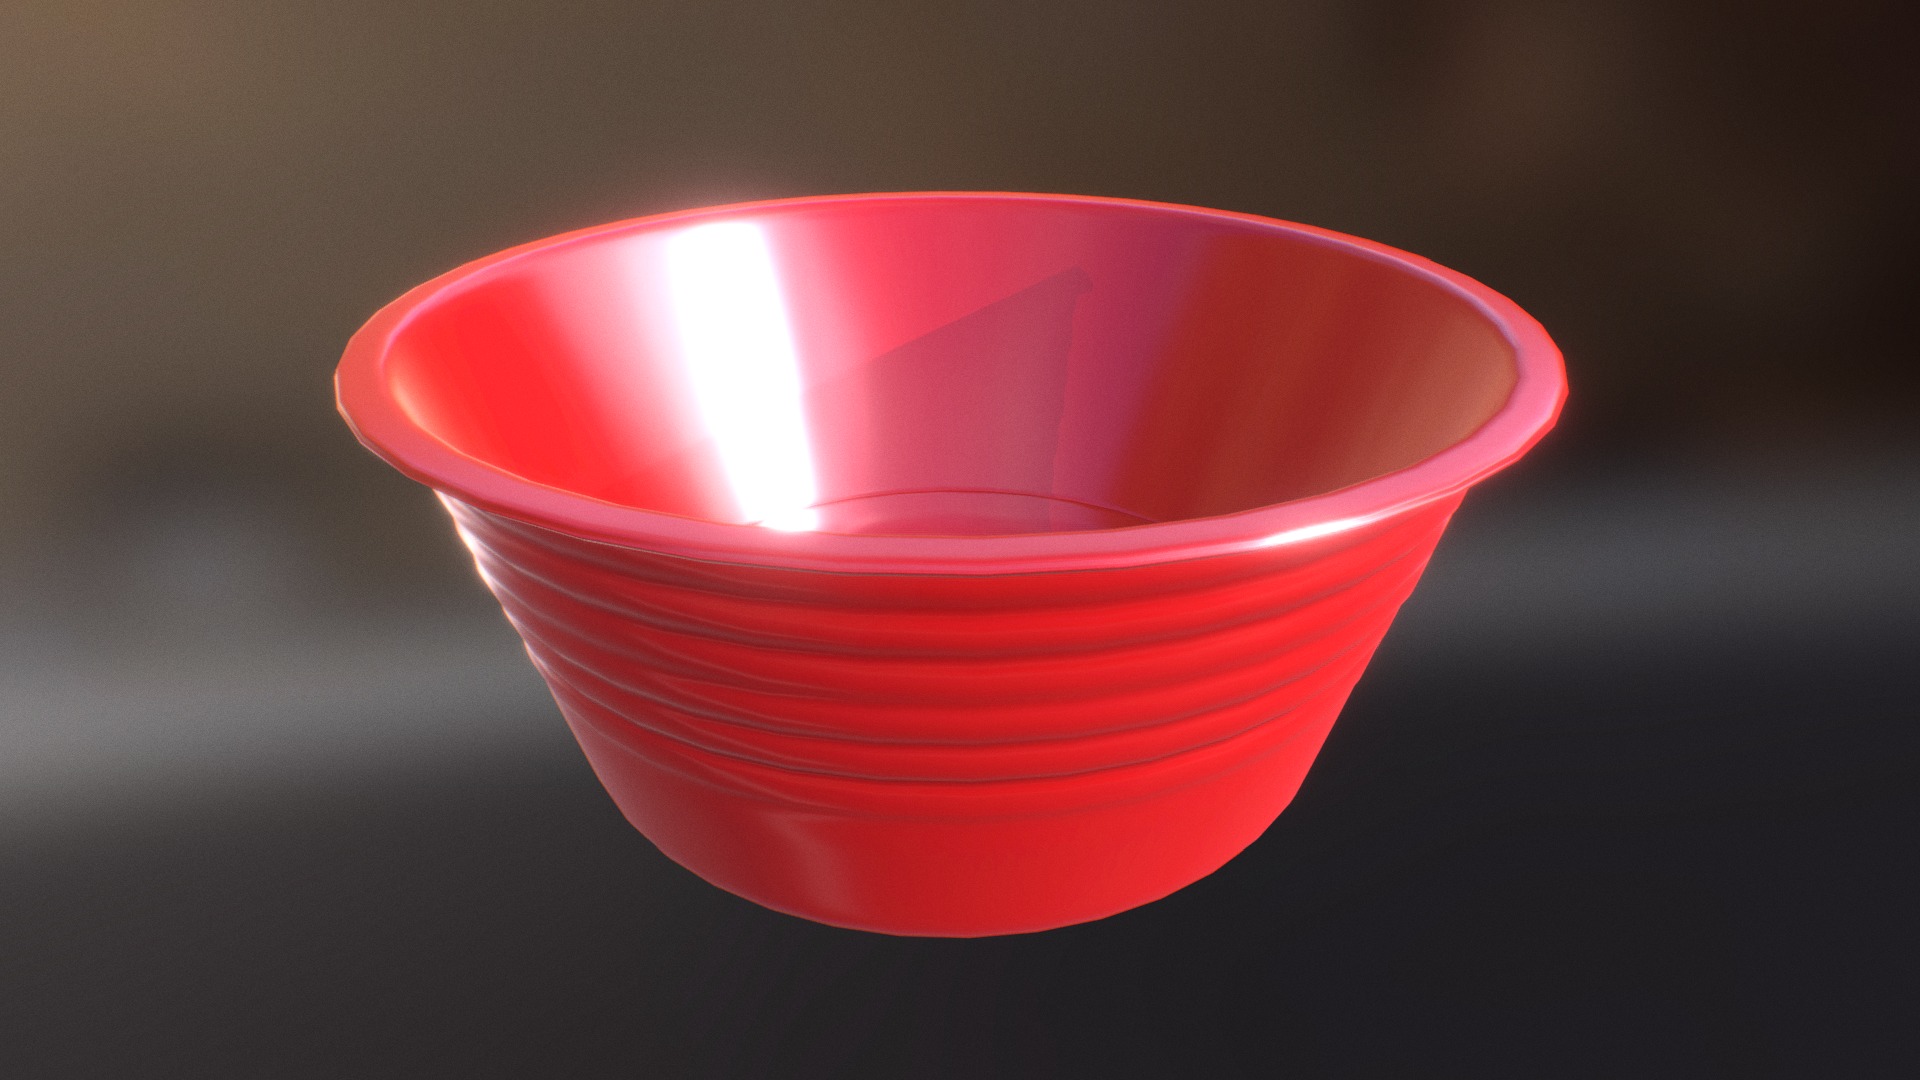 3D model Jícara Plastic Liquid Container - This is a 3D model of the Jícara Plastic Liquid Container. The 3D model is about a red candle with a flame.